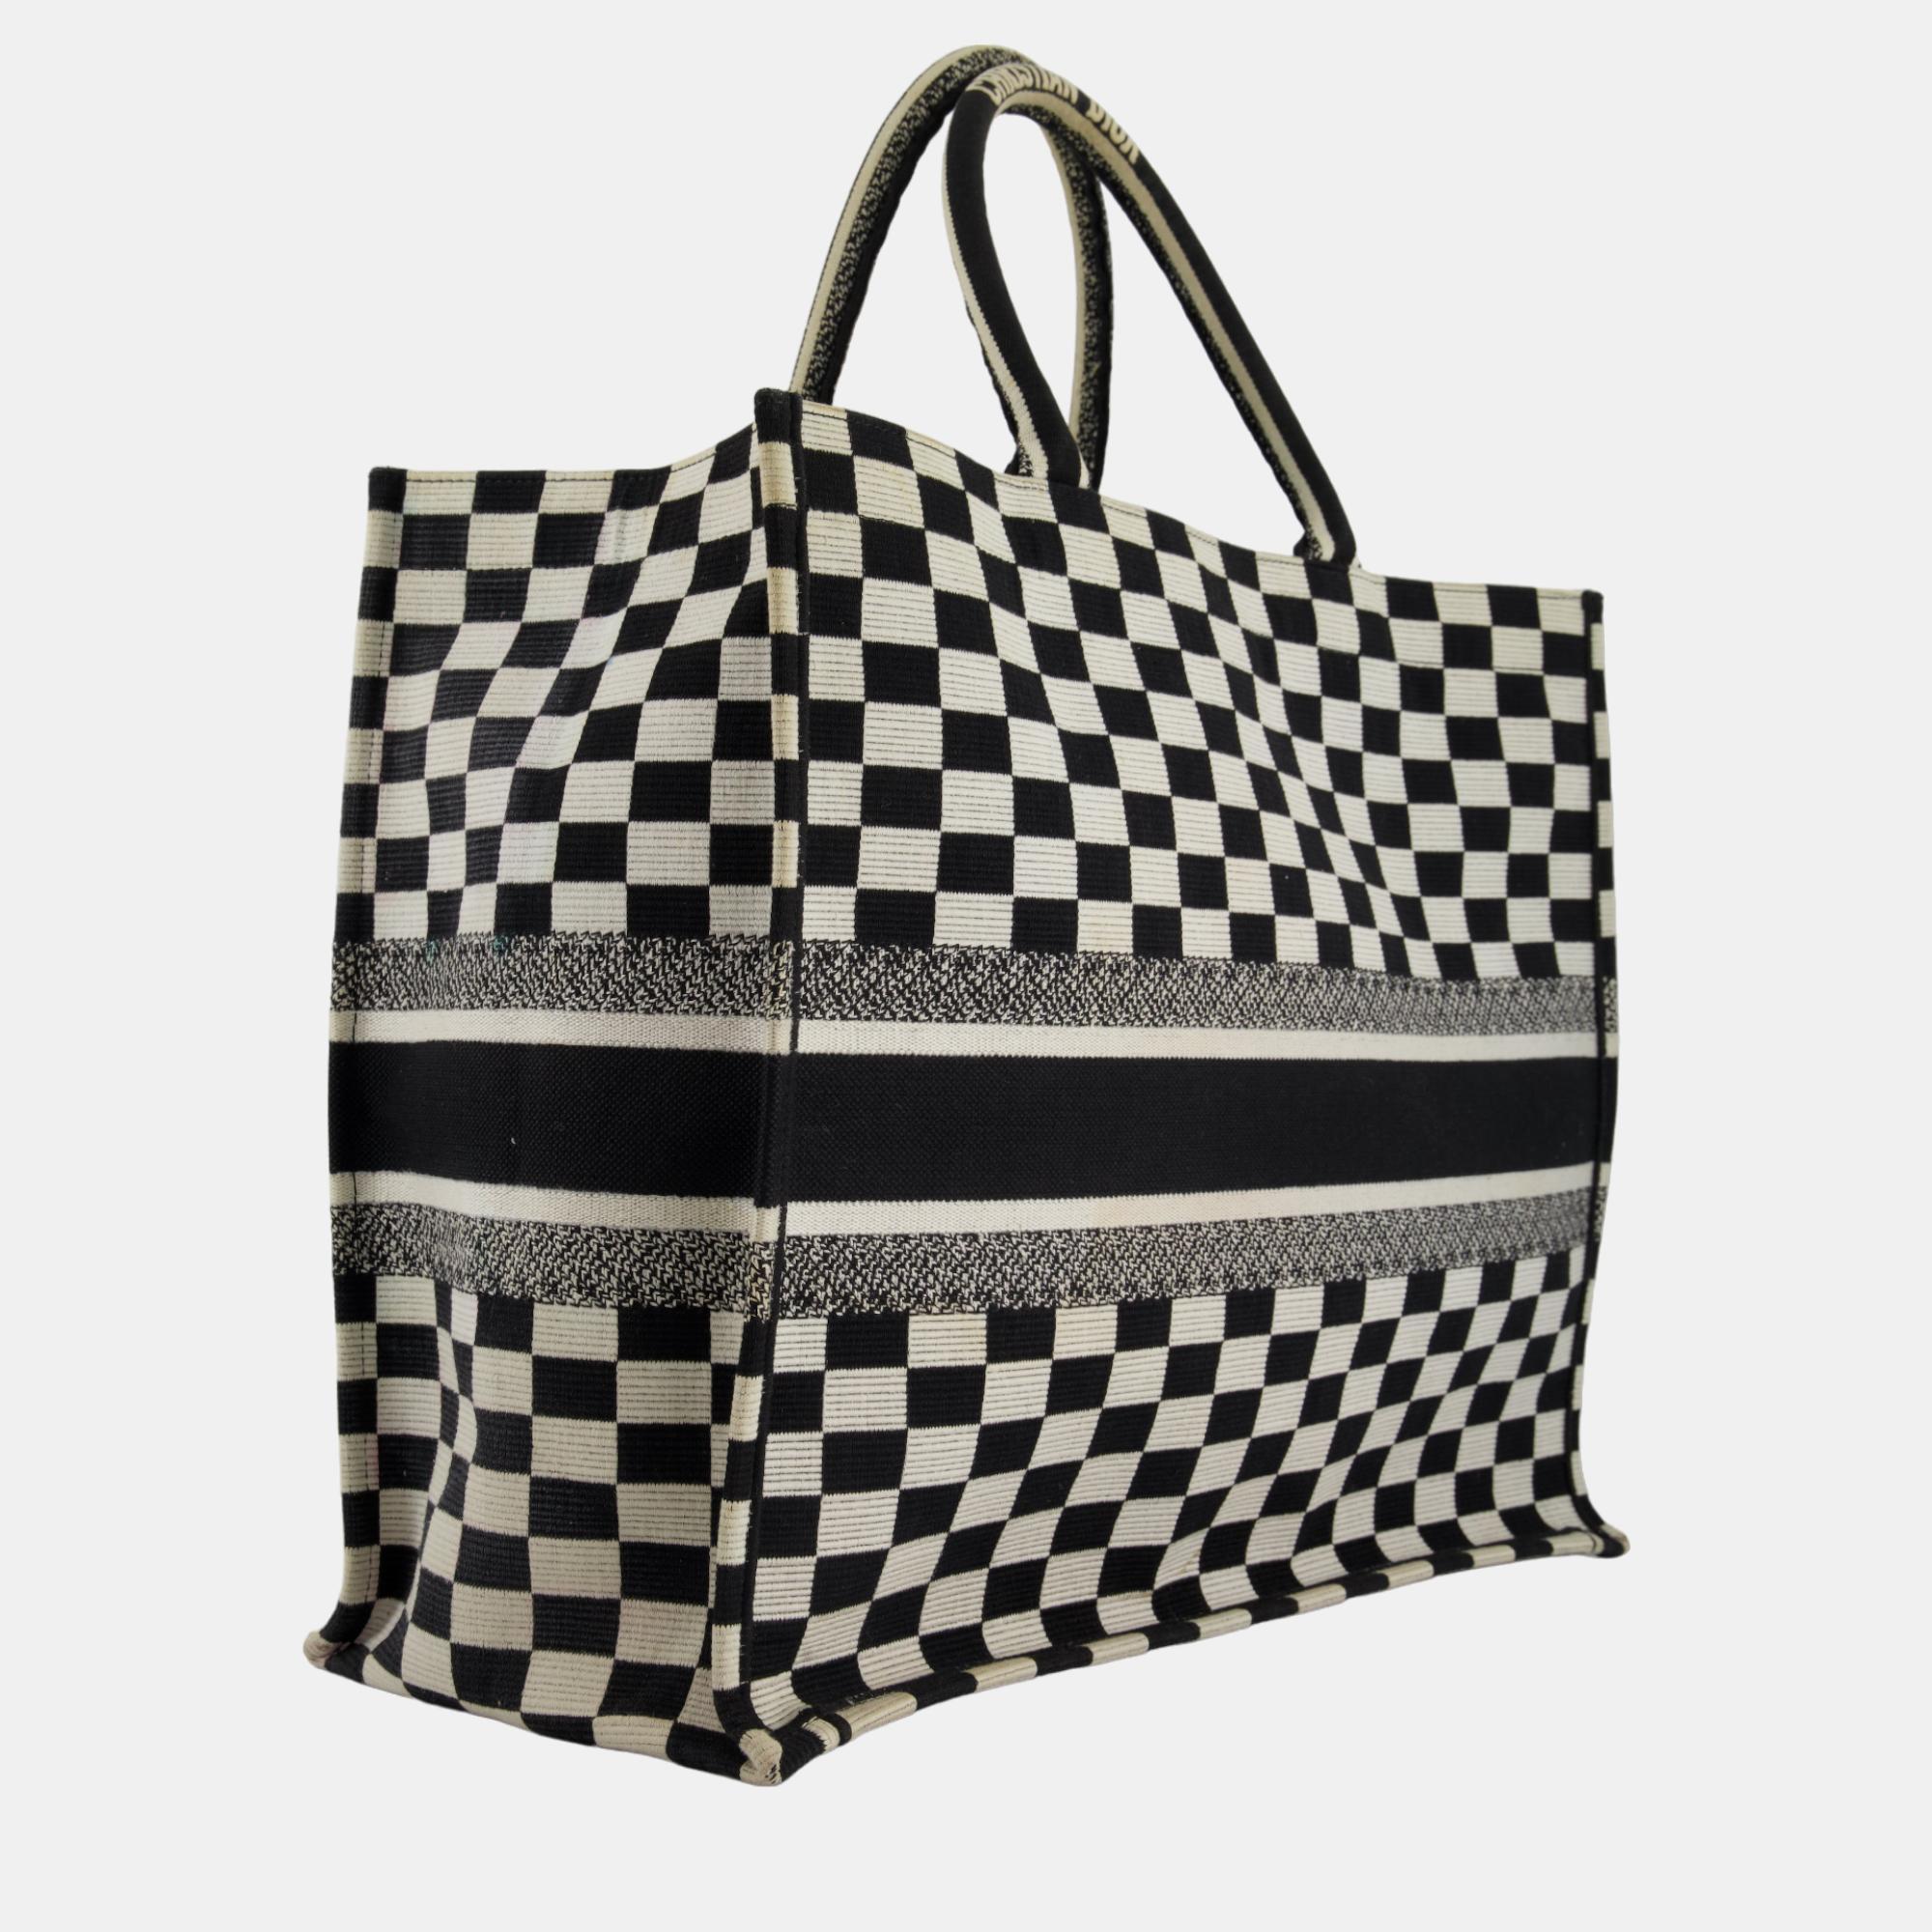 Christian Dior Large Black And White Chequered Book Tote Bag